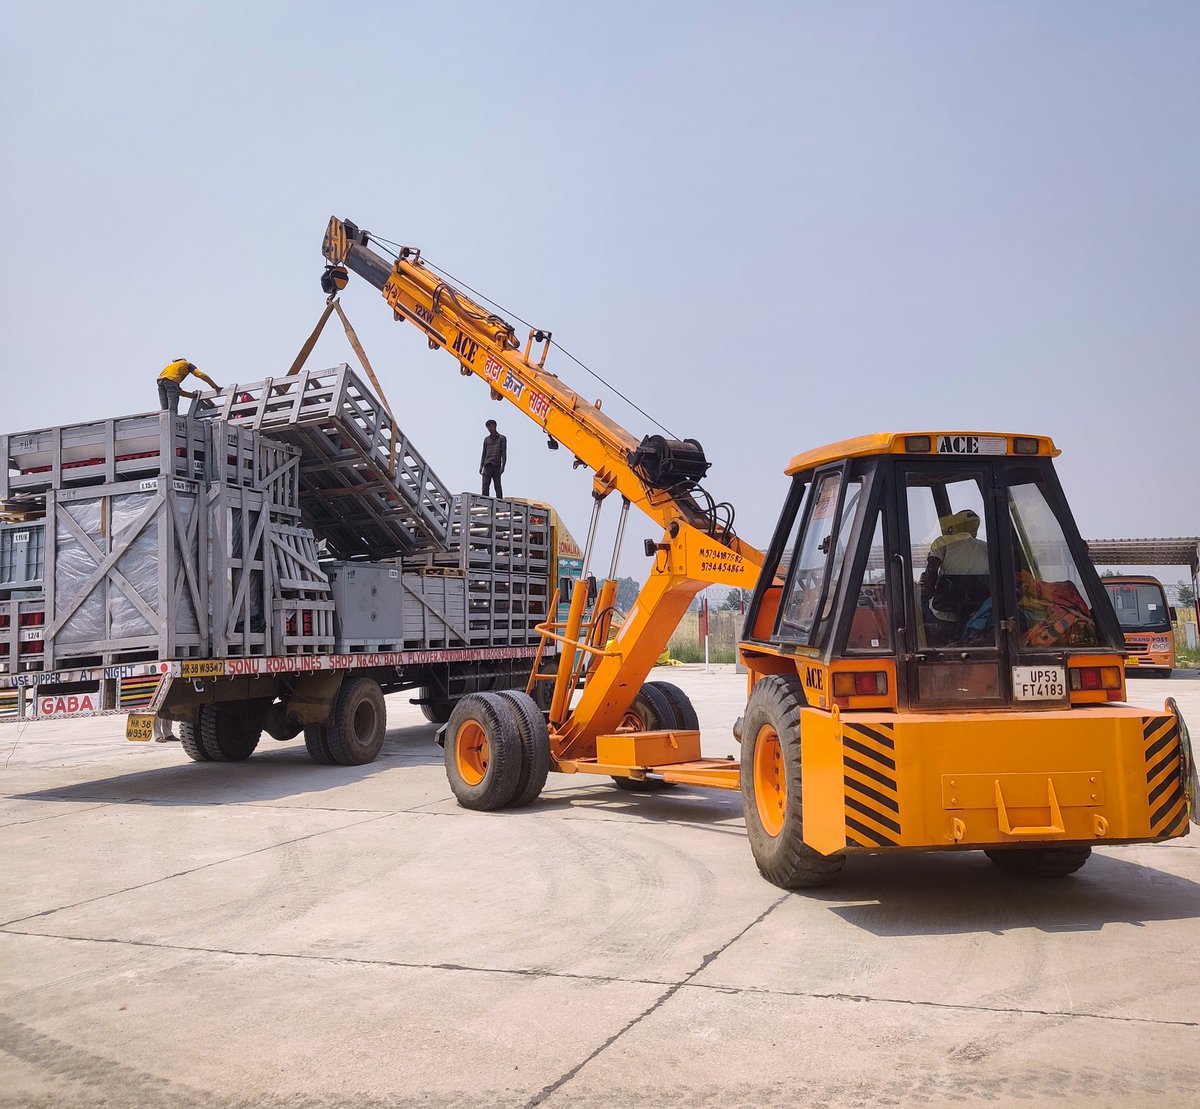 Much awaited ILS Equipment (RTS -734,CAT-I) arrived and unloaded at Kushinagar Airport in presence of CNS In-Charge. It has been procured and imported from NPO 'RTS', Russia. Civil Electrical works have been started,Installation process will start soon. @AAI_Official @aaiRedNR